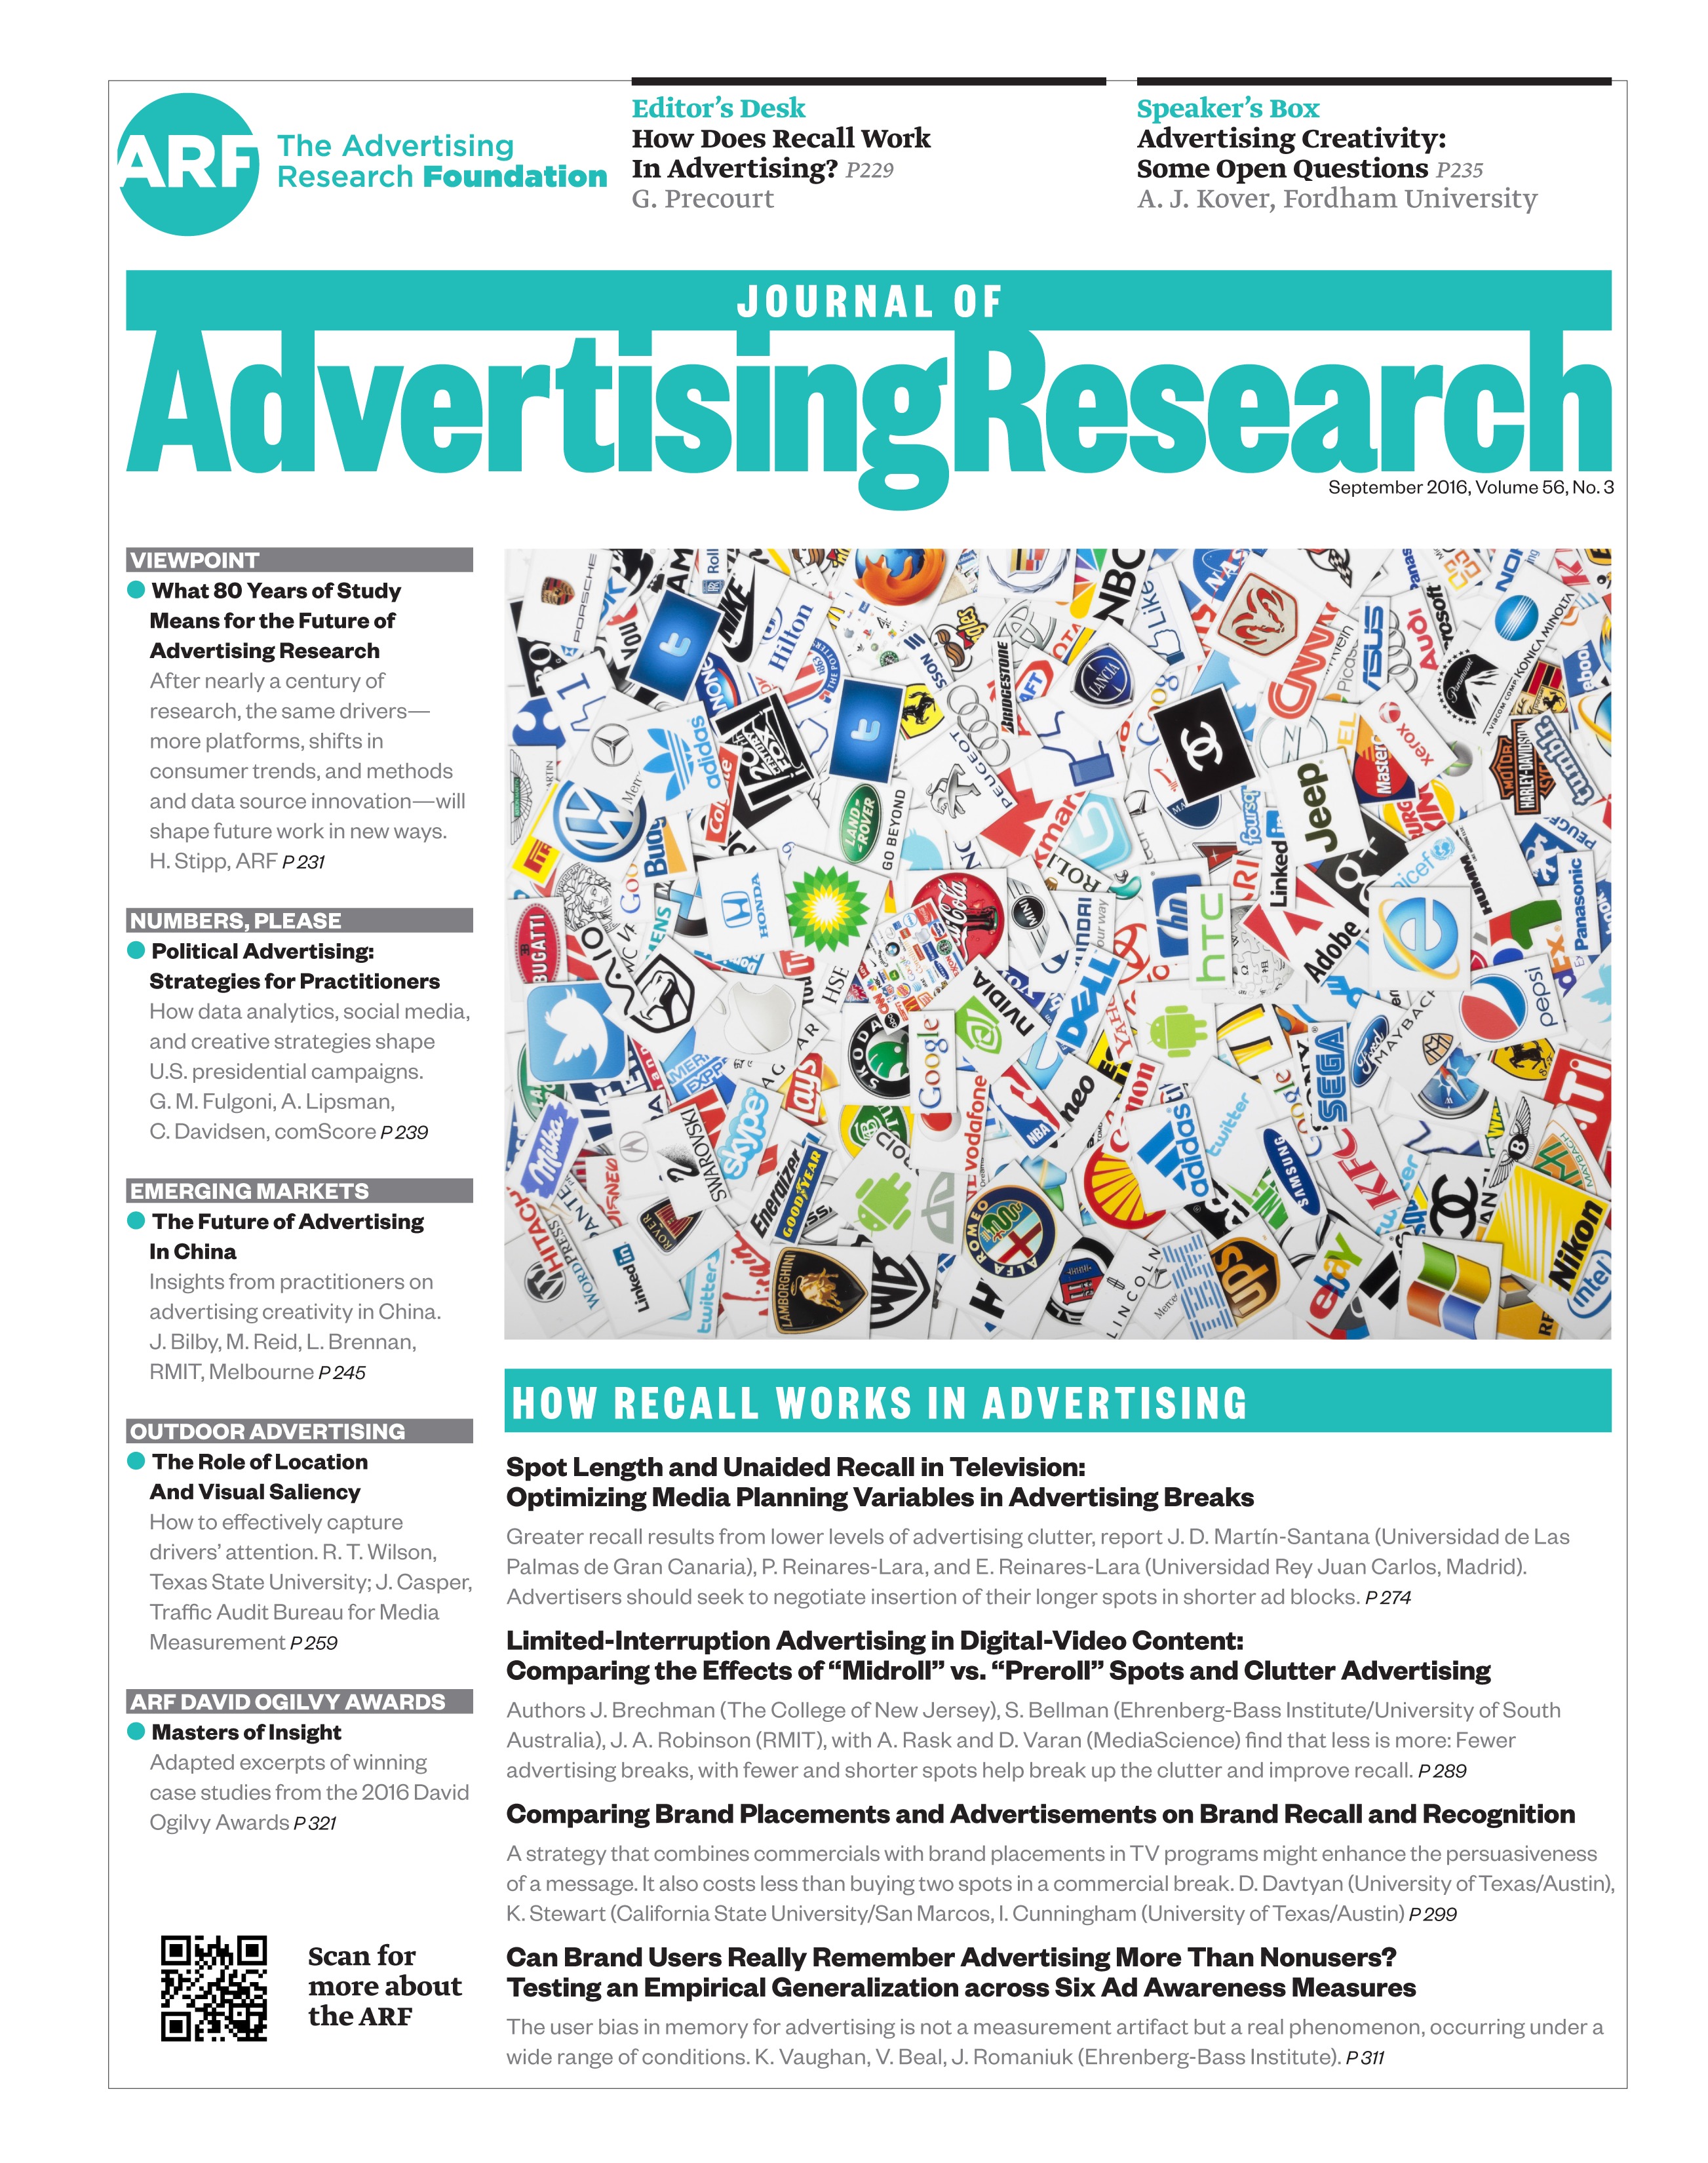 advertising related research topics